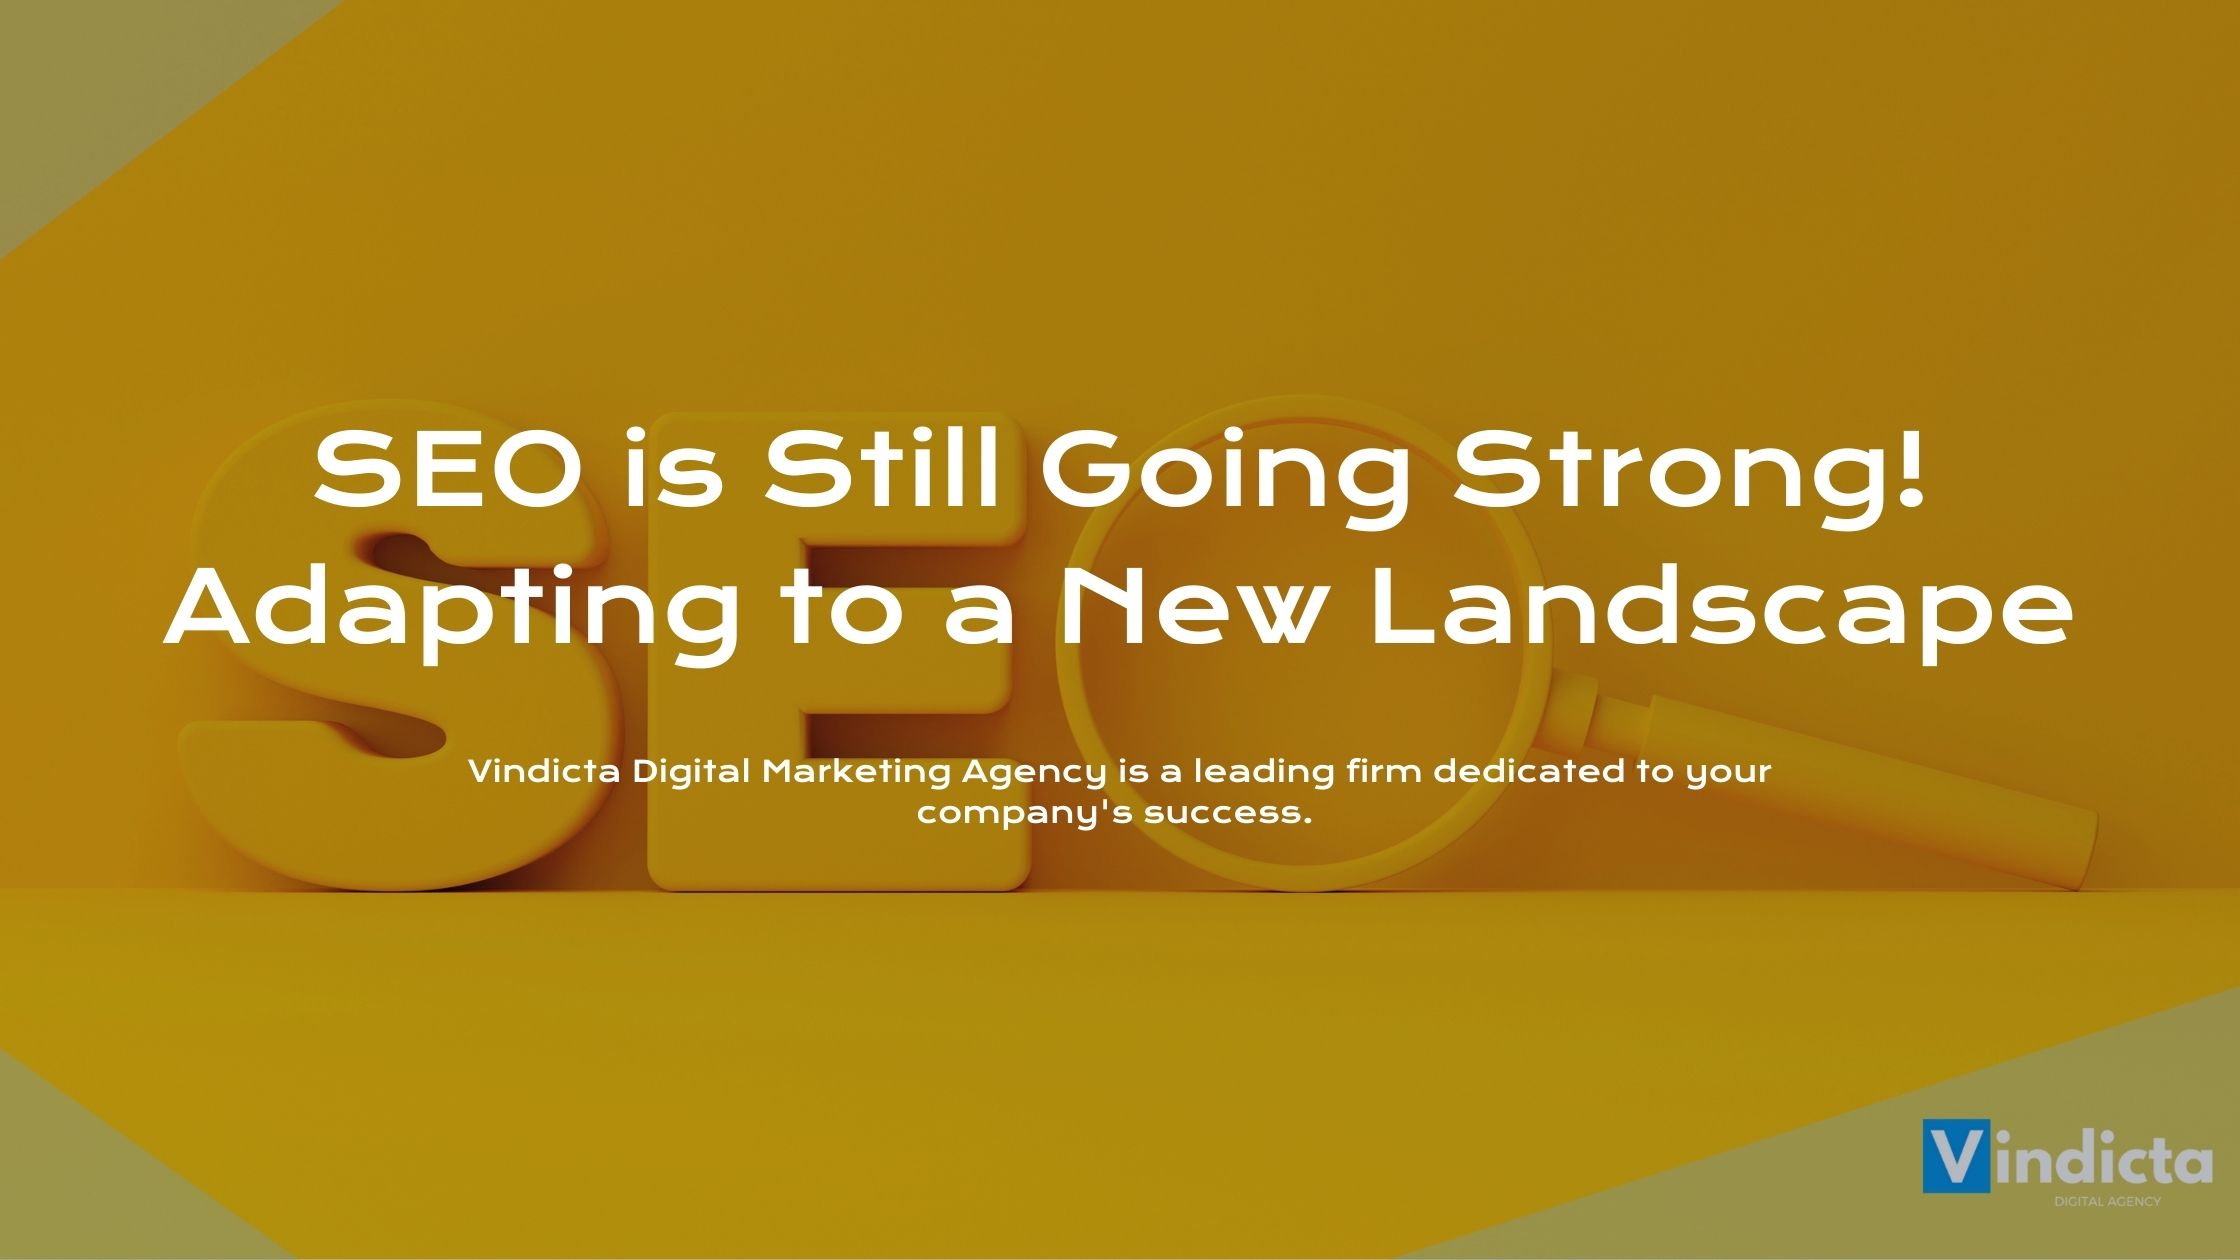 SEO is Still Going Strong! Adapting to a New Landscape